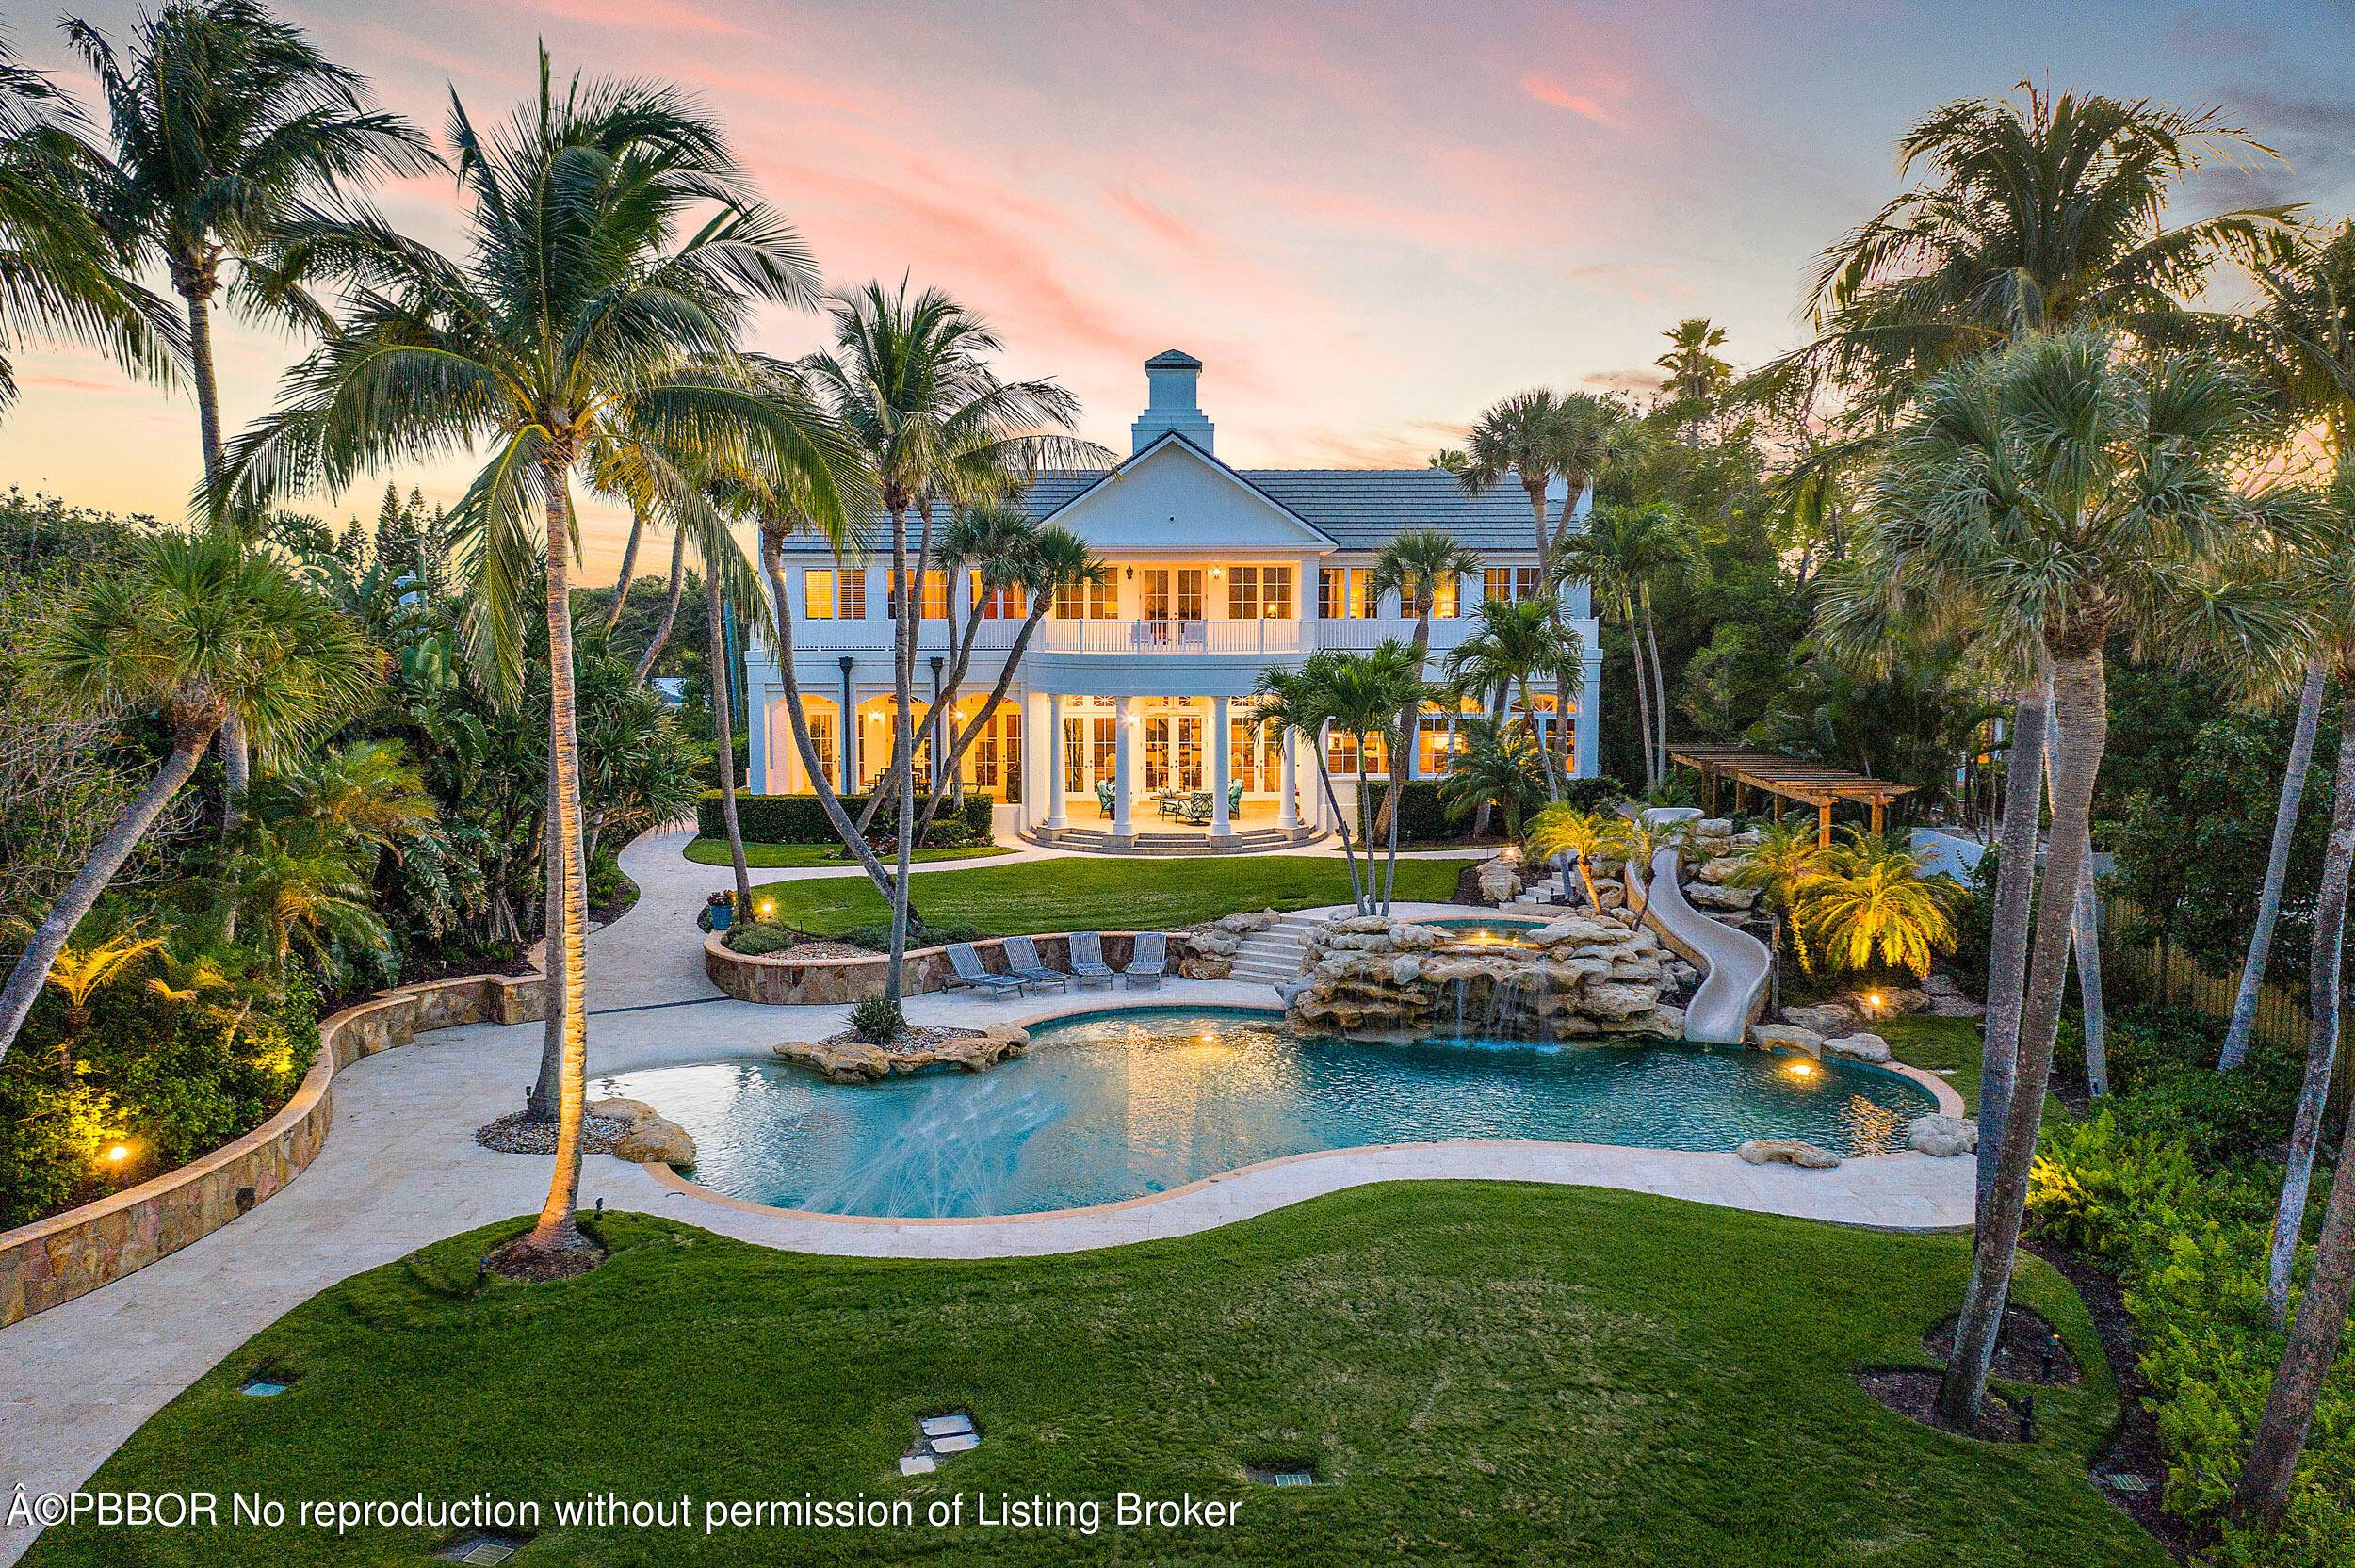 On 100 feet of blue, Intracoastal waters this plantation style estate on 3.